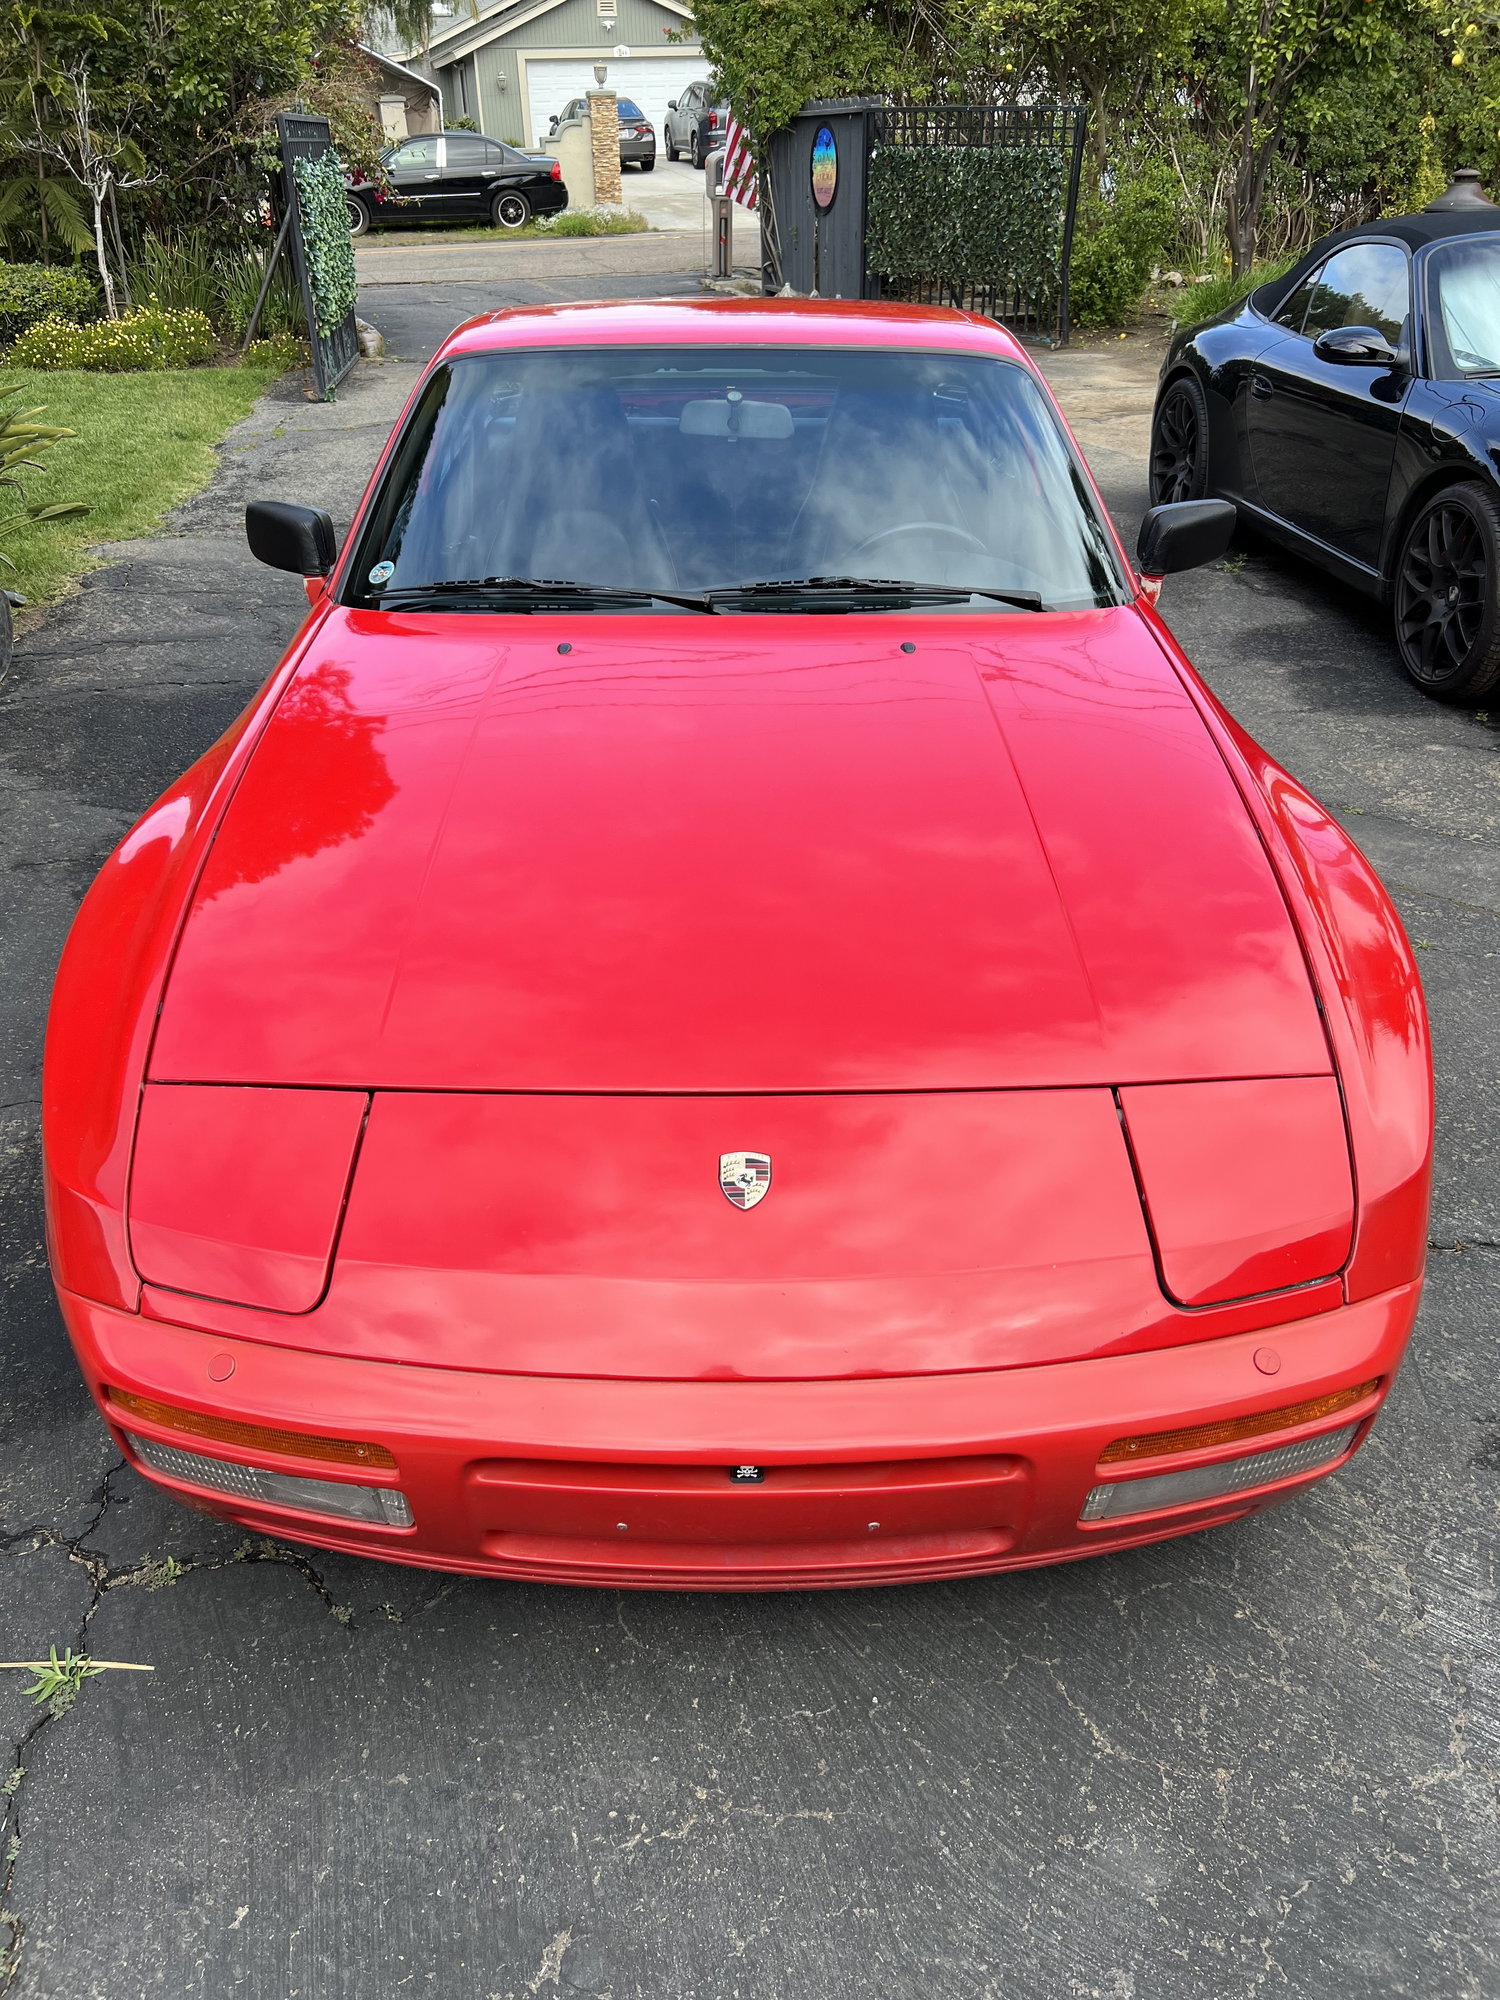 1987 Porsche 944 - 1987 Porsche 944 Turbo 2.8L ANDIAL 951 For Sale - Used - VIN WP0AA2950HN150264 - 4 cyl - 2WD - Manual - Coupe - Red - Vista, CA 92083, United States